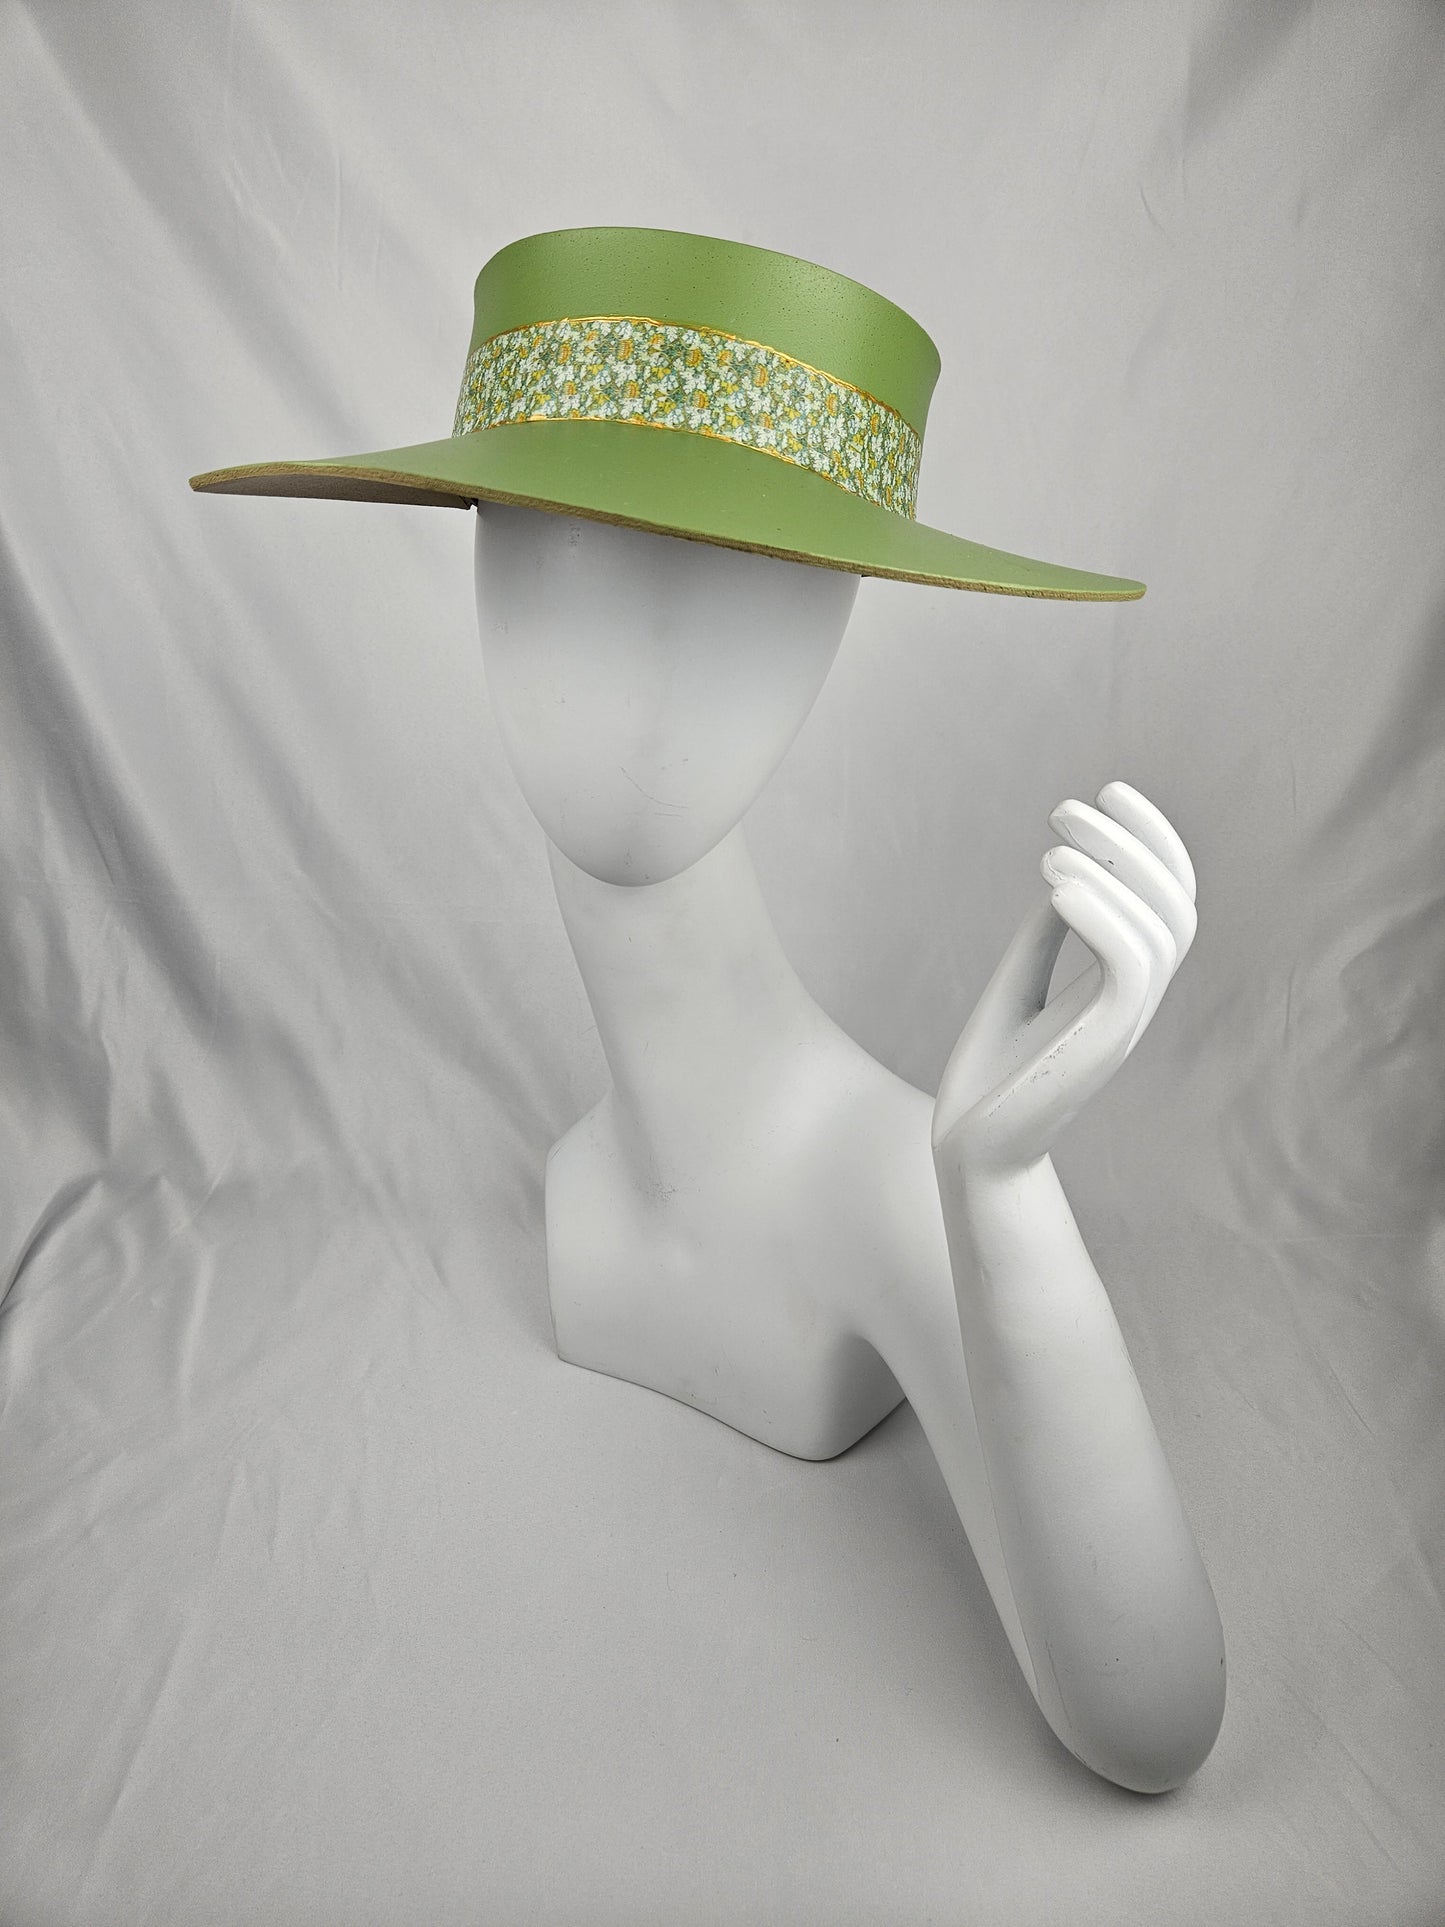 Spring/Summer Green Audrey Foam Sun Visor Hat with Green Floral Band and Handpainted Motif: Garden, Golf, Pool, UV Resistant, No Headache